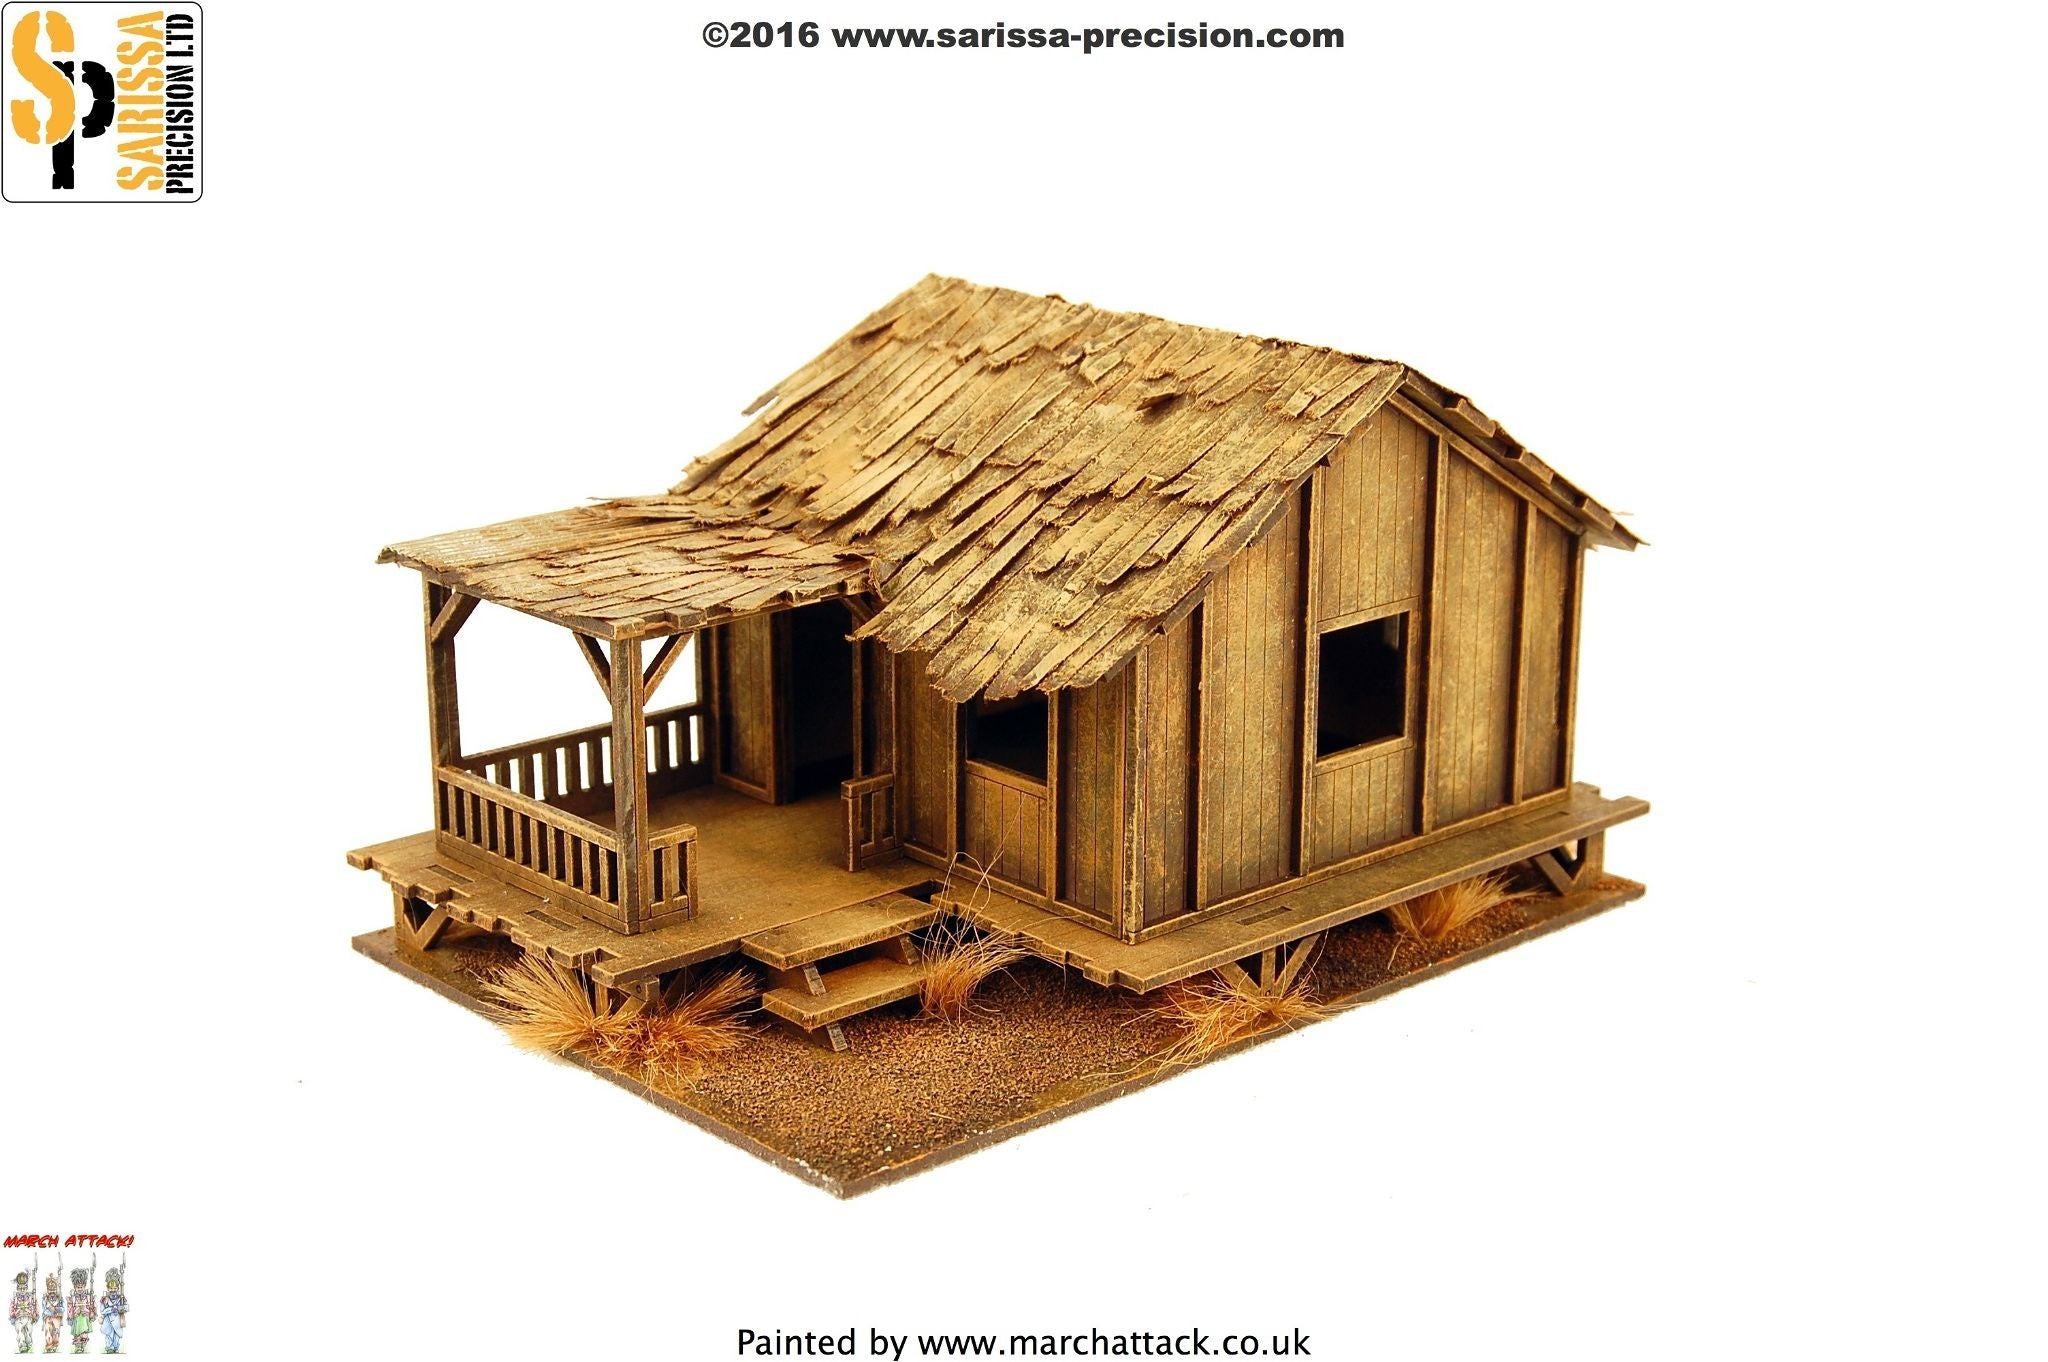 Low Planked-Style Village House - 20mm